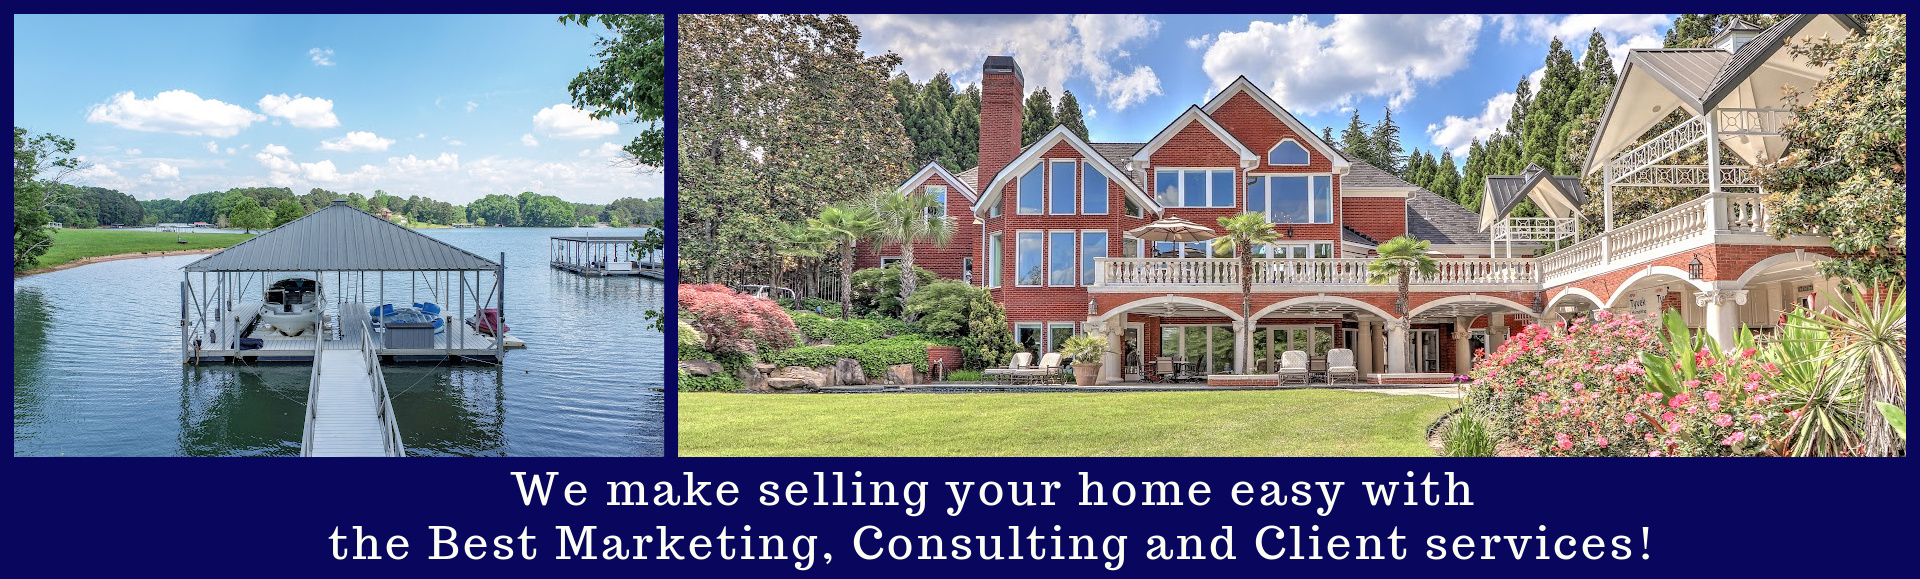 4-3a We make selling your home easy with the Best Marketing, Consulting and Client services! copy